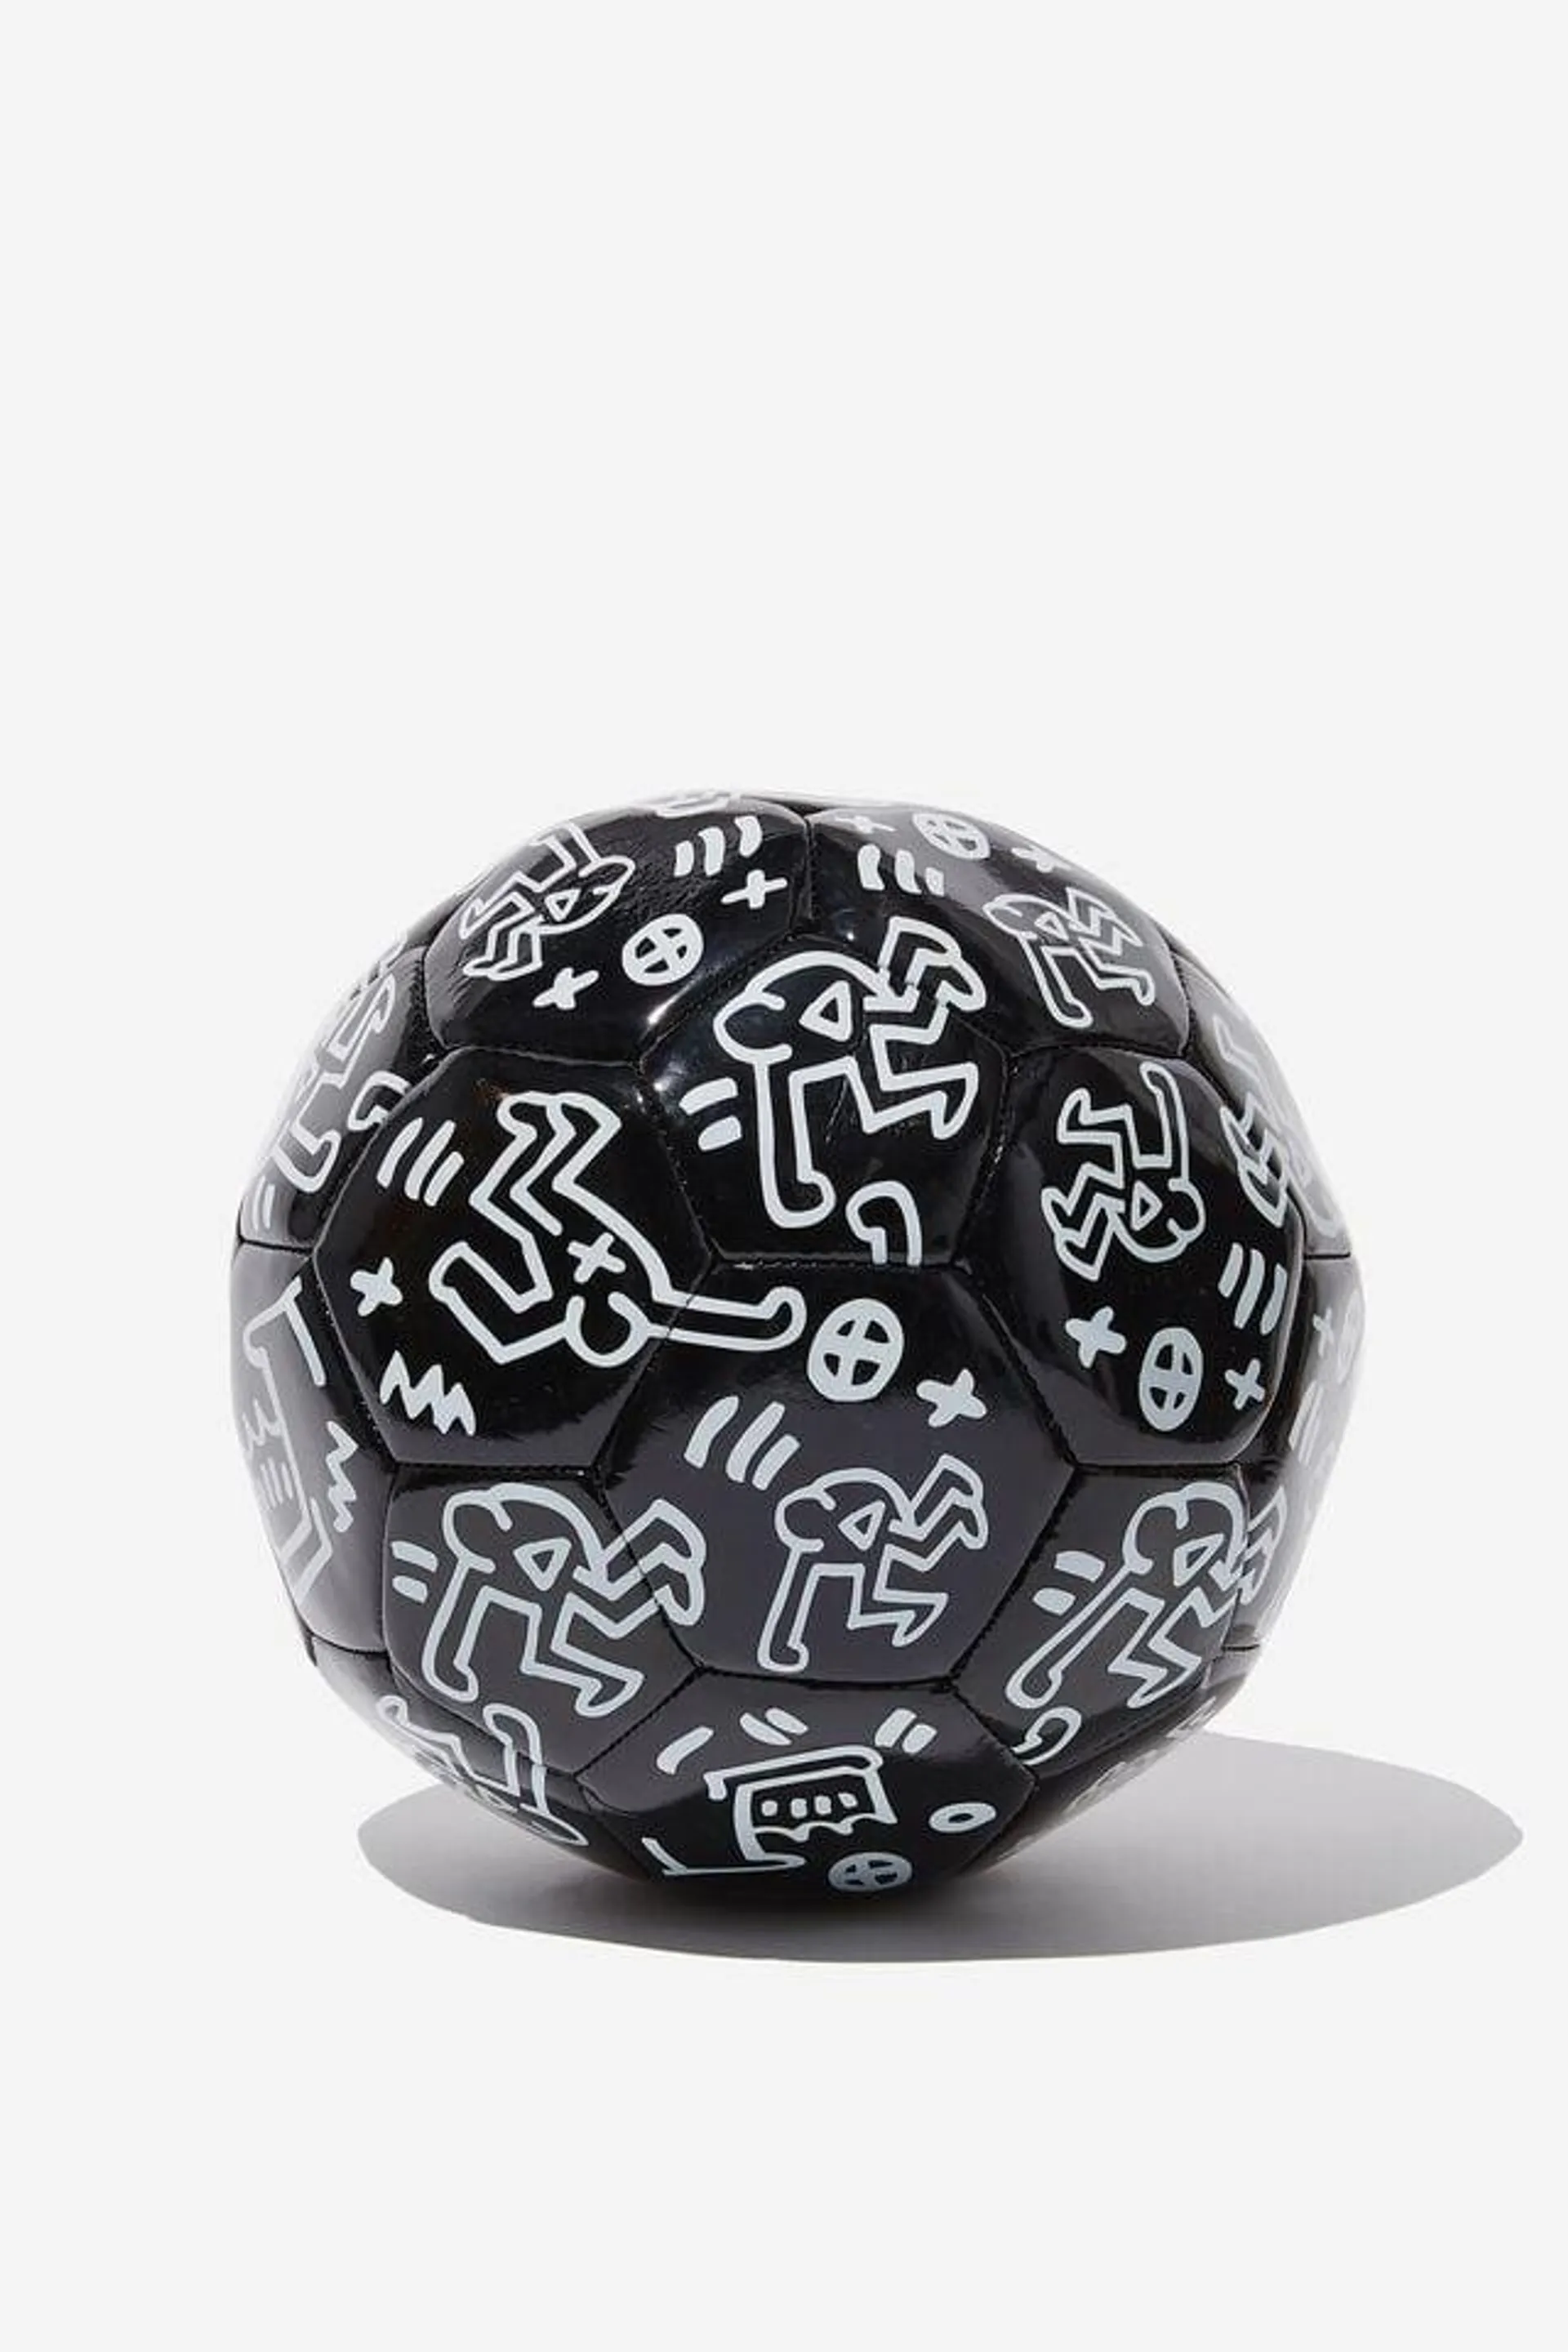 Keith Haring Soccer Ball Size 5